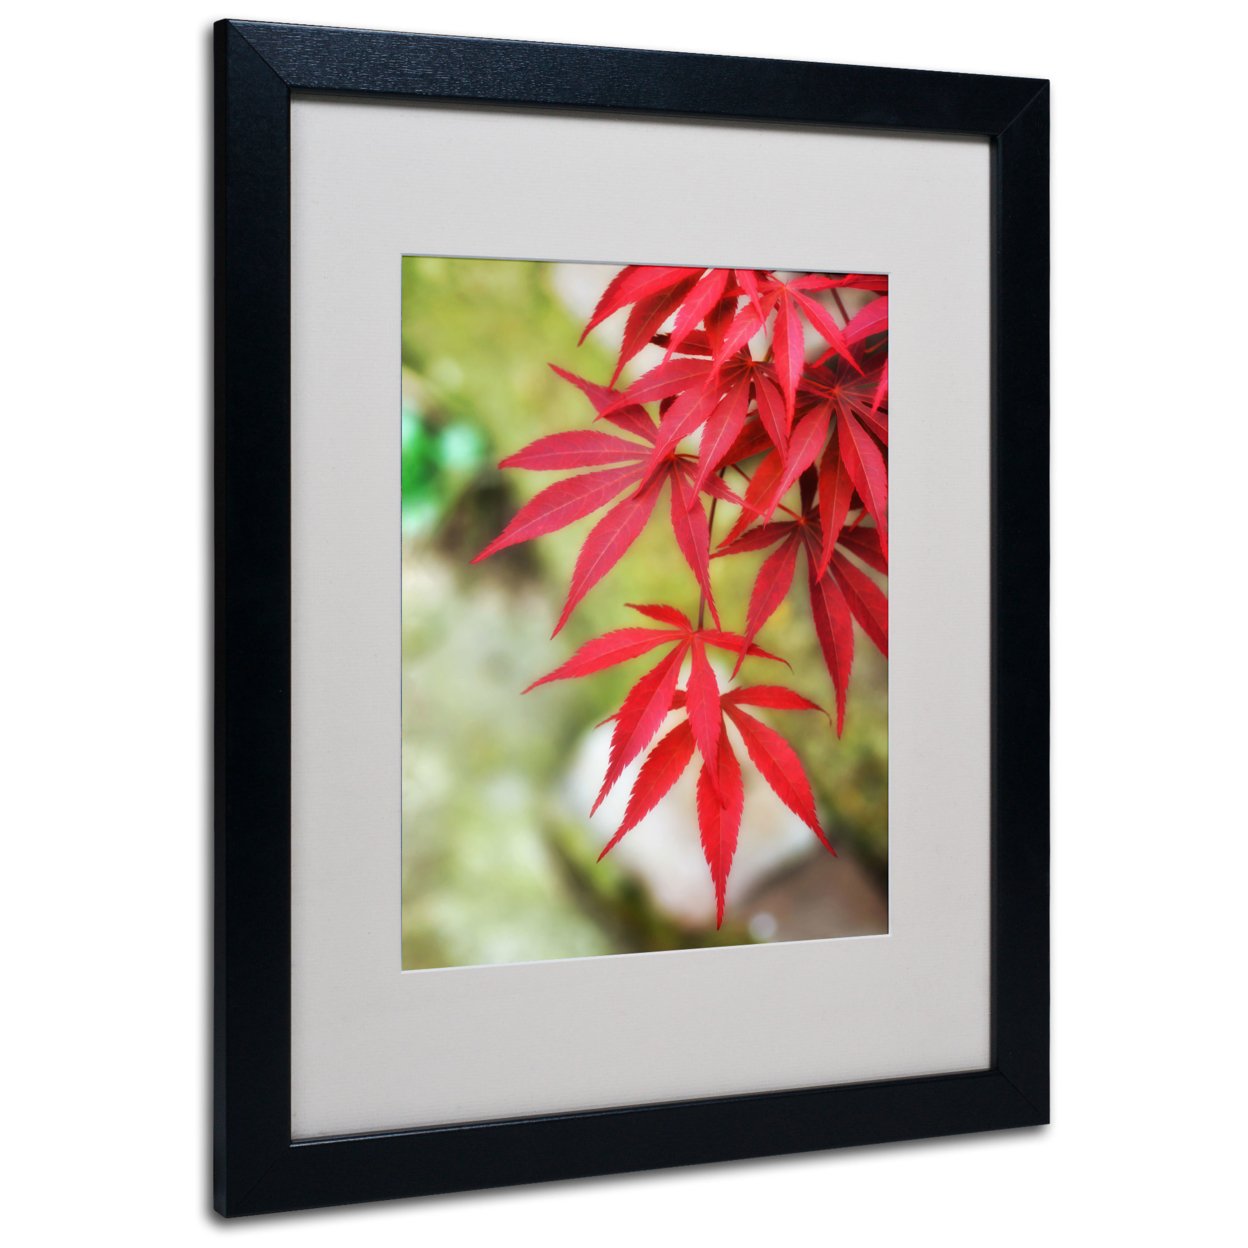 Trademark Global Philippe Sainte-Laudy Japanese Maple Black Wooden Framed Art 18 x 22 Inches